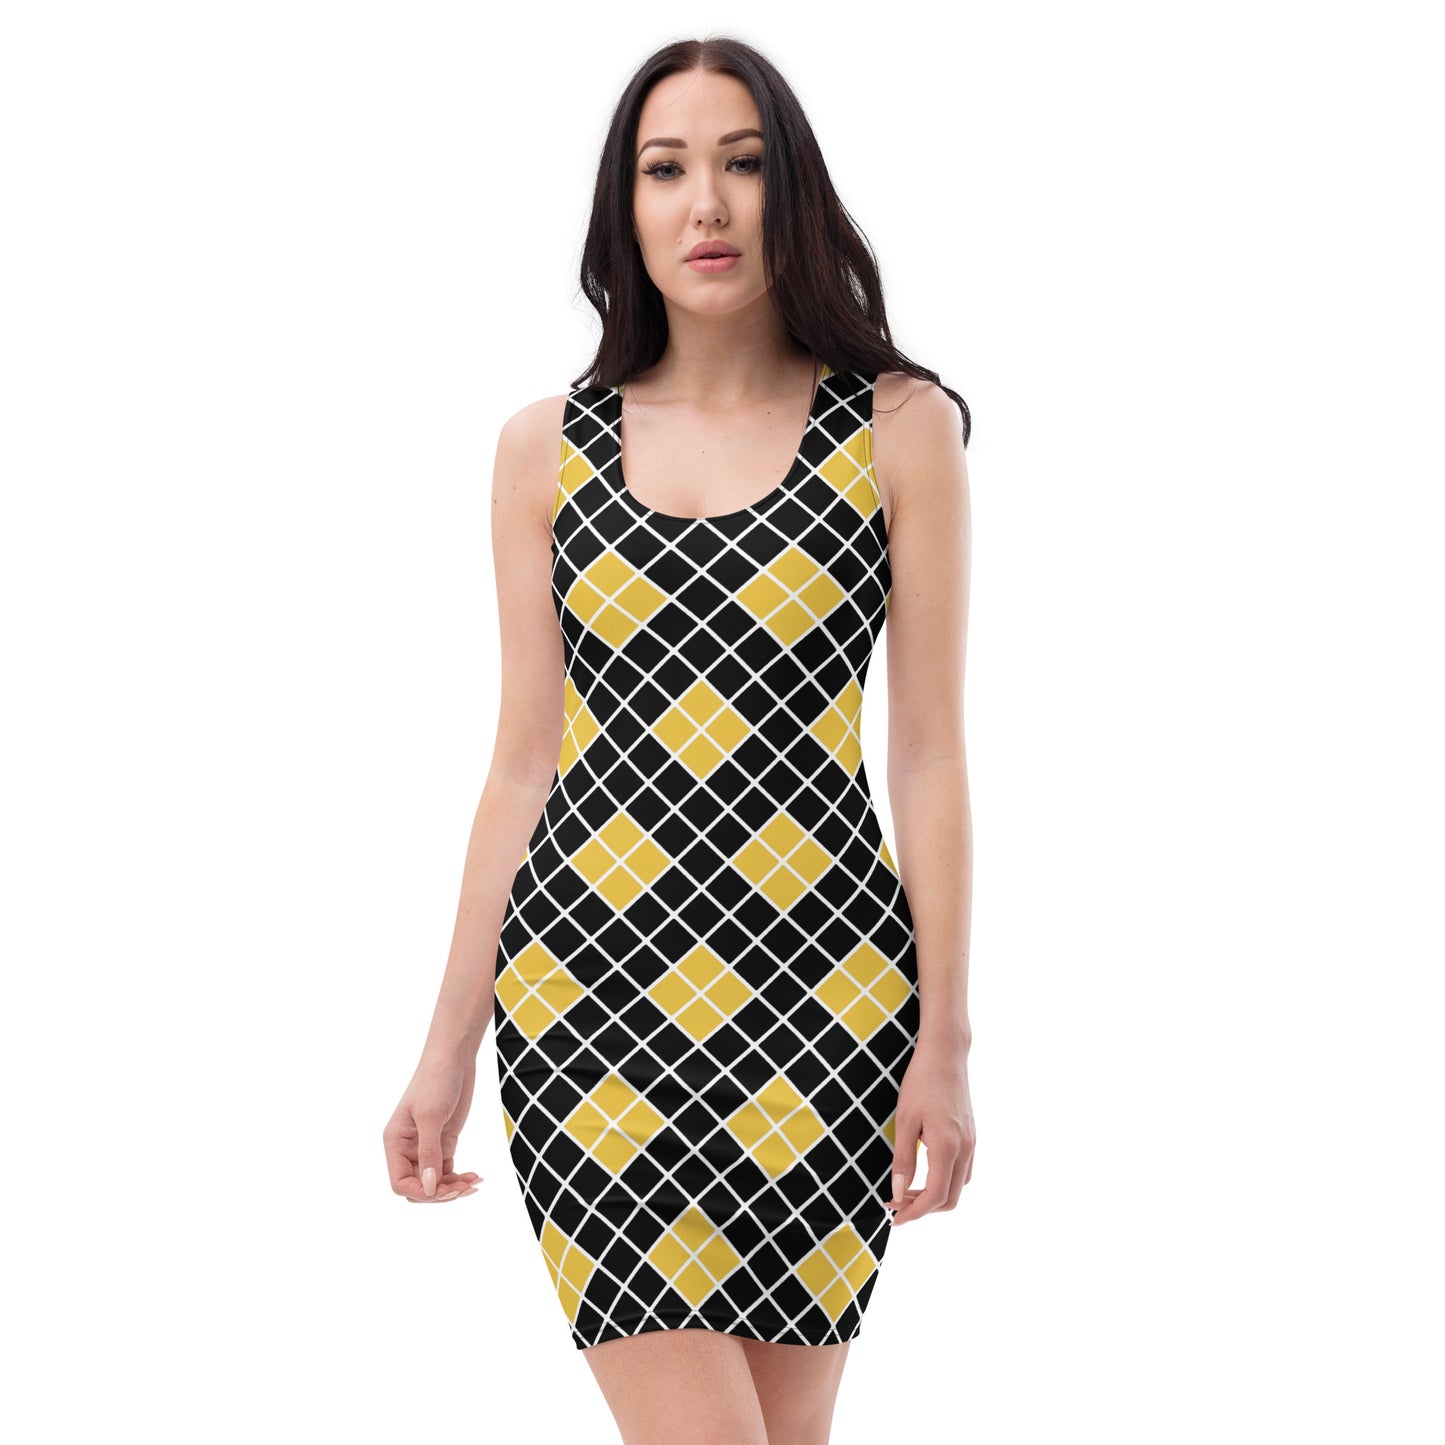 "Checkers Gold" Sublimation Cut & Sew Dress